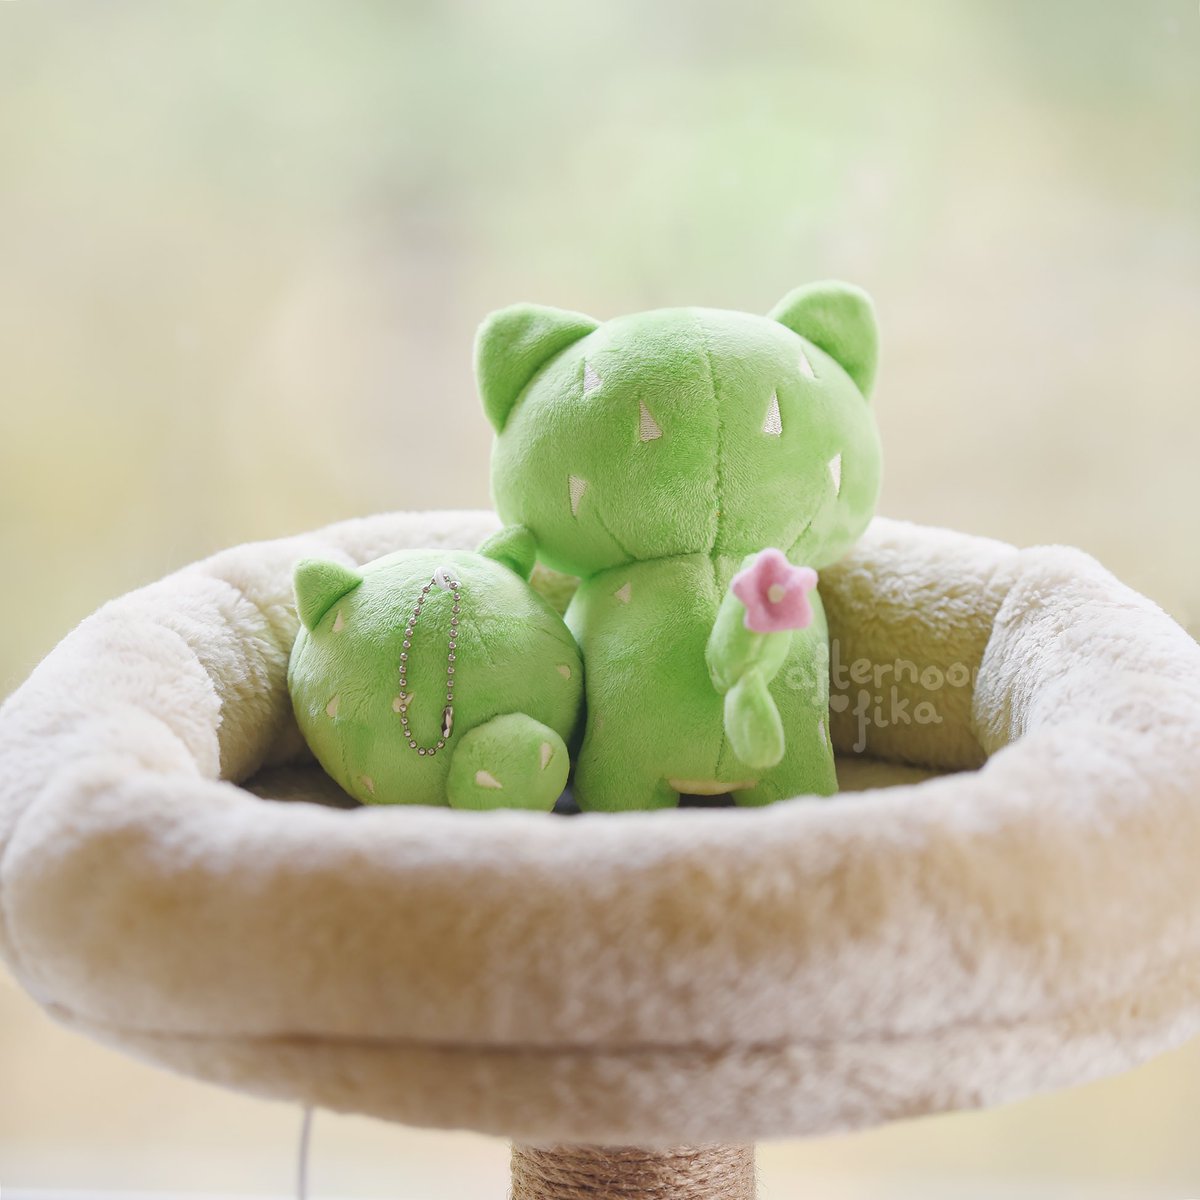 🌵 Catcus family plush giveaway! 🐱

💚 RT + follow us for a chance to become catci parents!
💚 Ships internationally
💚 Giveaway ends 23/10